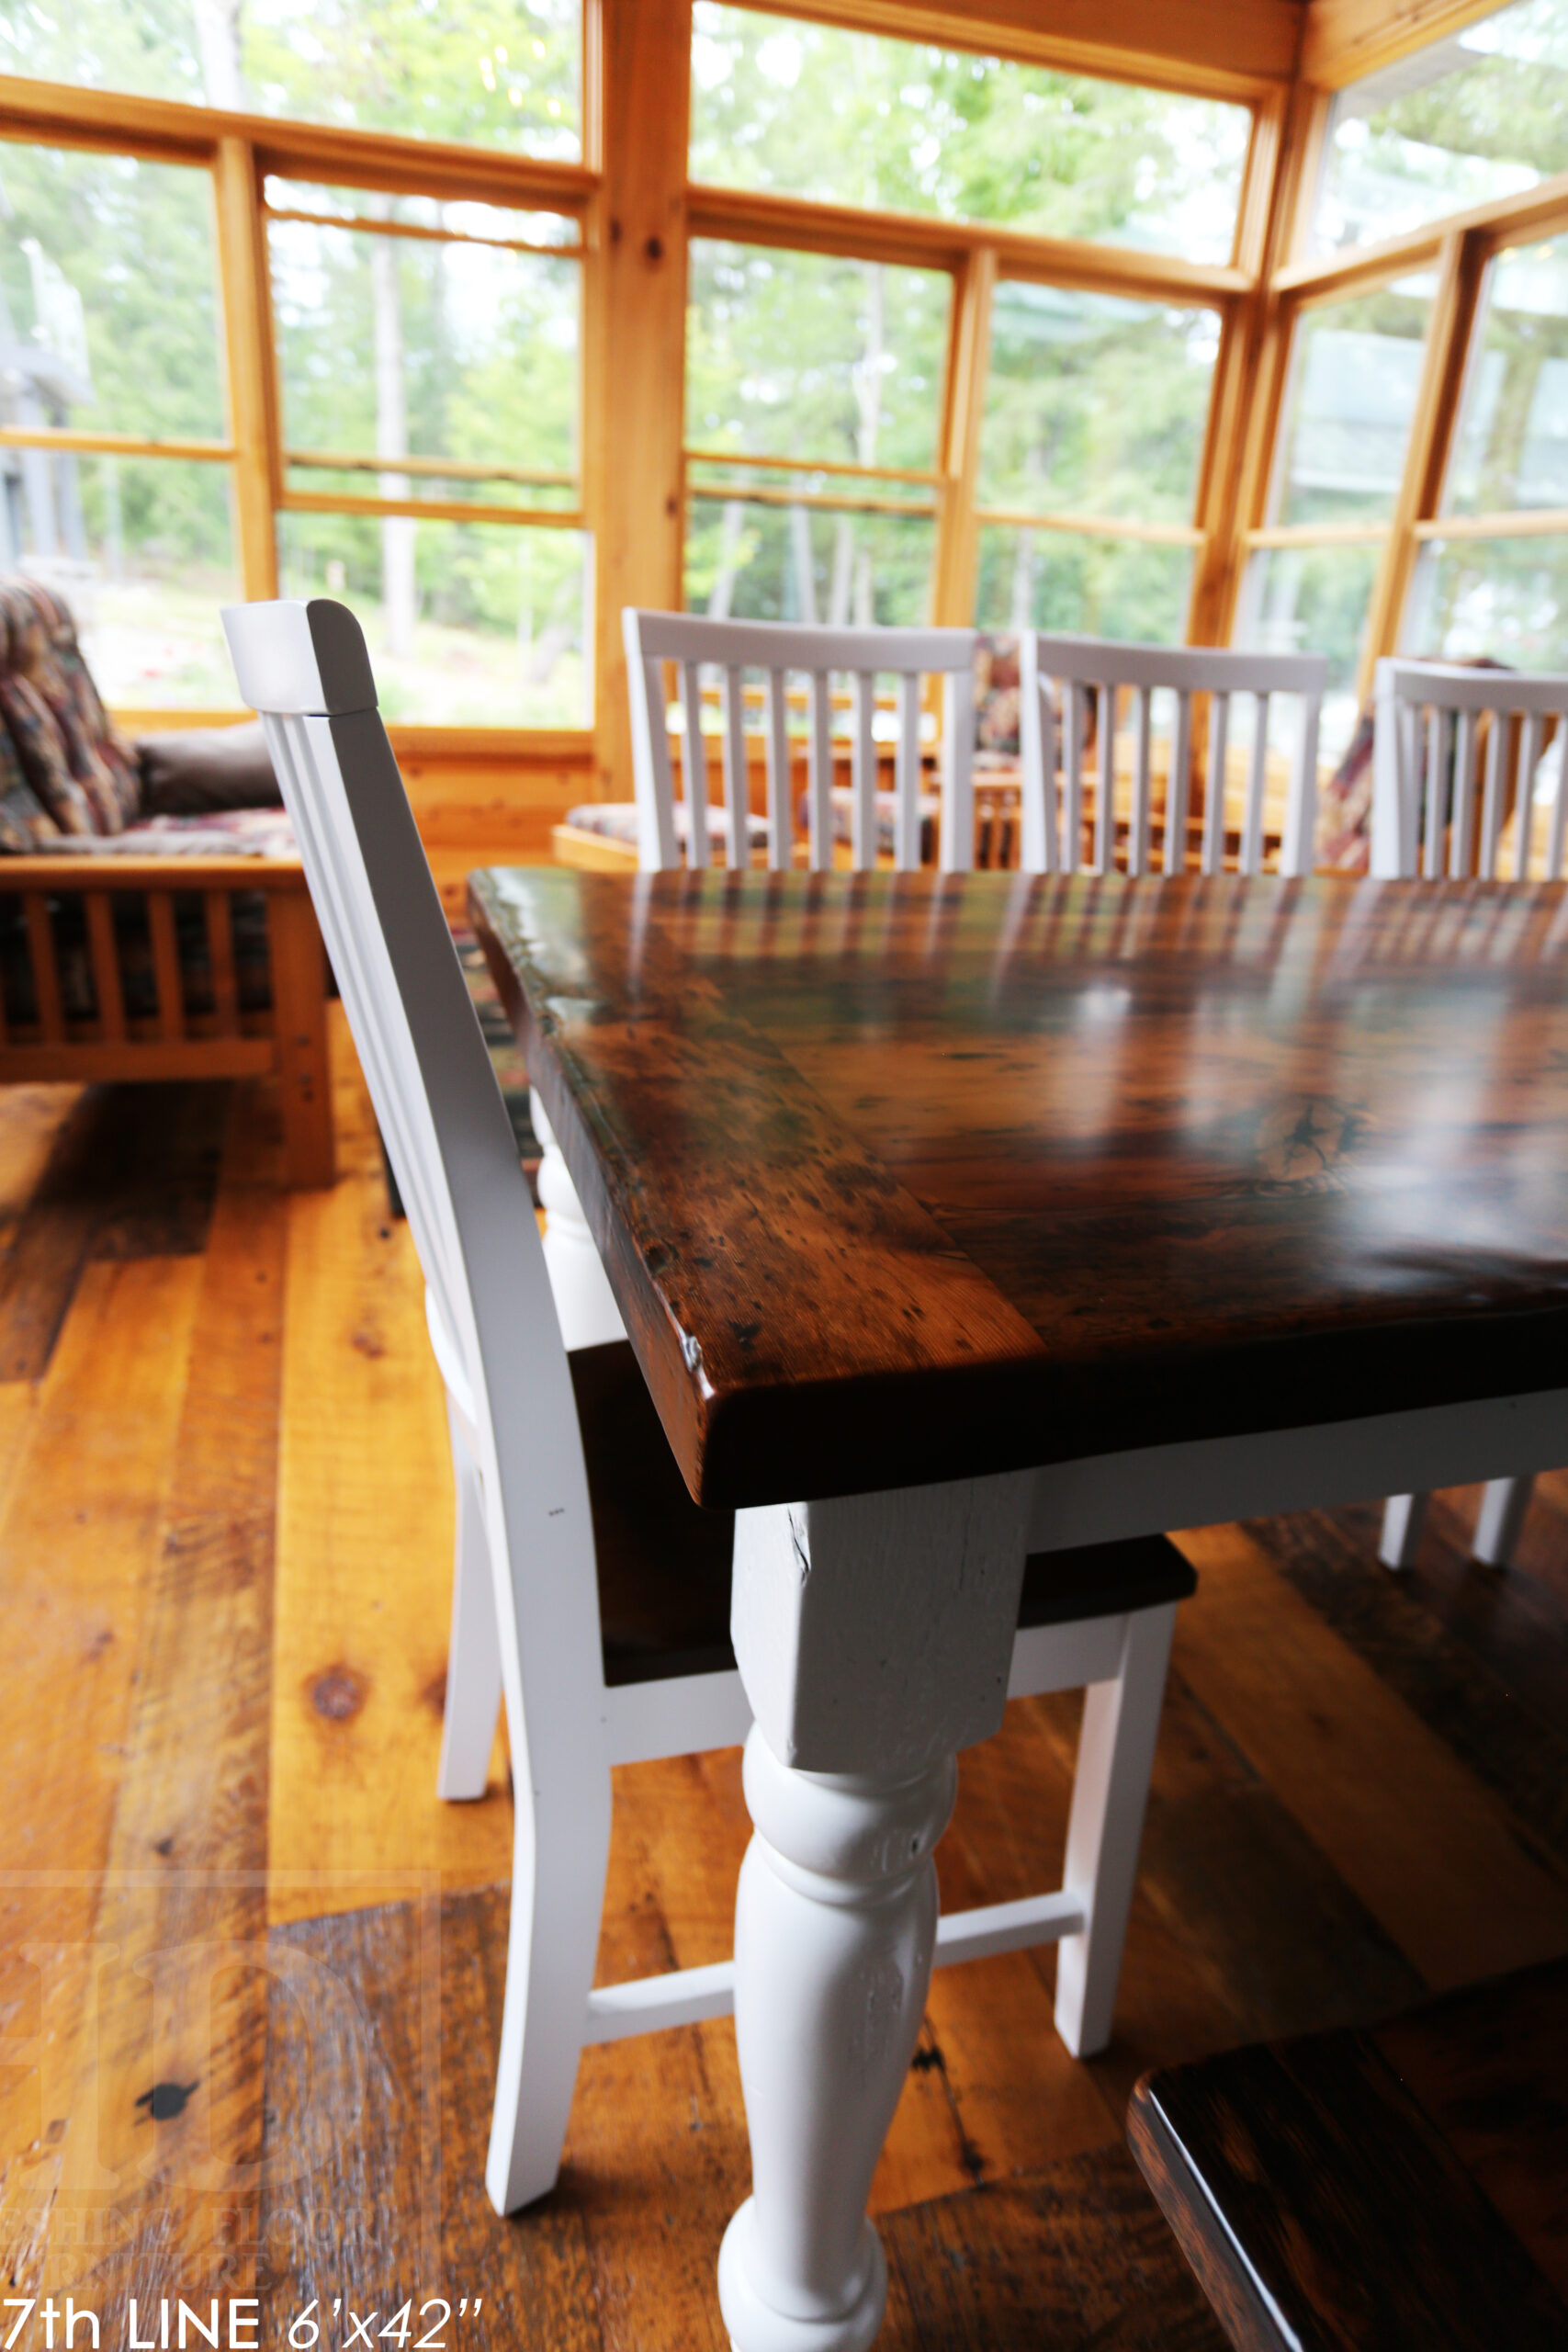 Details: 6' Reclaimed Wood Table we made for an Ontario cottage - 42" wide - Harvest Base - Turned Windbrace Beam Legs [painted white] - Old Growth Hemlock Threshing Floor Construction - Original edges & distressing maintained - Premium epoxy + satin polyurethane finish - 5' Trestle Bench - 5 Hudson Chairs / Wormy Maple / White Frame + Seat stained colour of table - www.table.ca